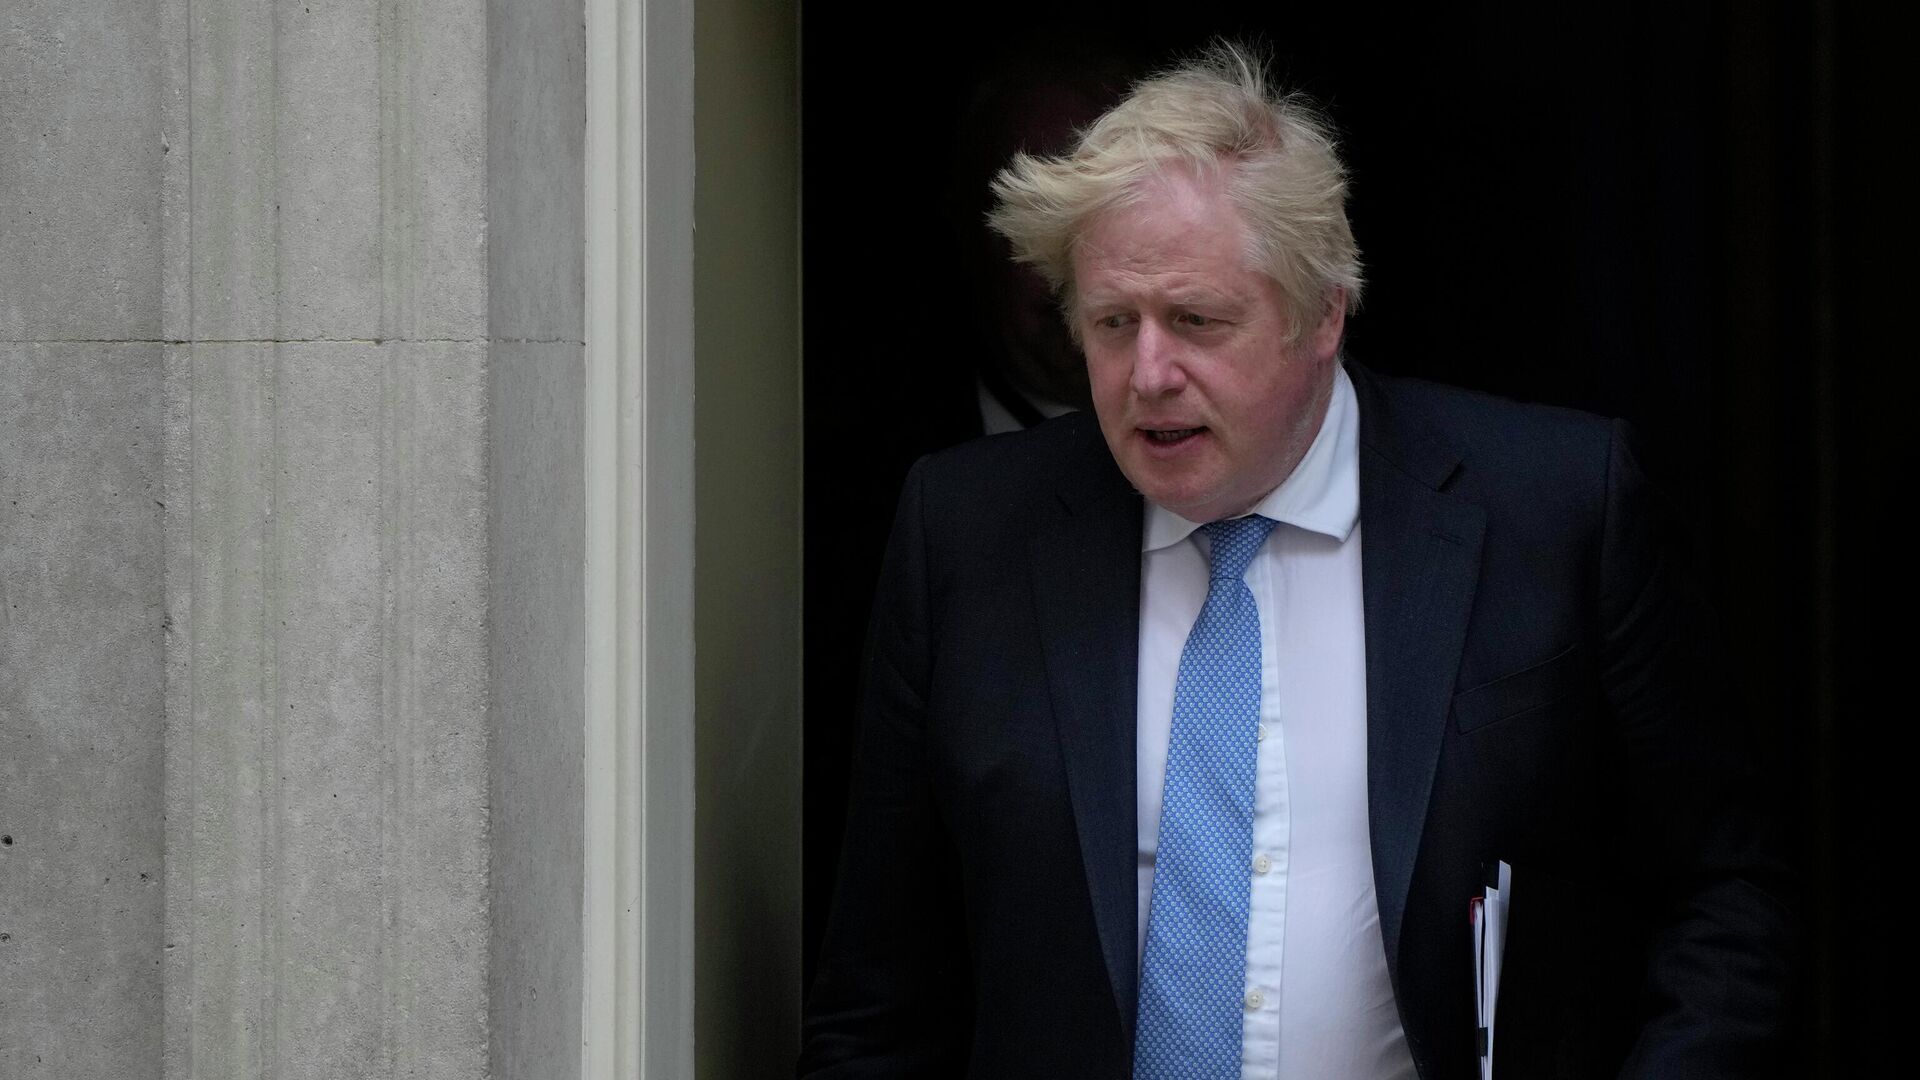 Britain's Prime Minister Boris Johnson leaves 10 Downing Street for the House of Commons to make a statement about Downing Street parties during the coronavirus lockdowns in London, Tuesday, April 19, 2022 - Sputnik International, 1920, 28.05.2022